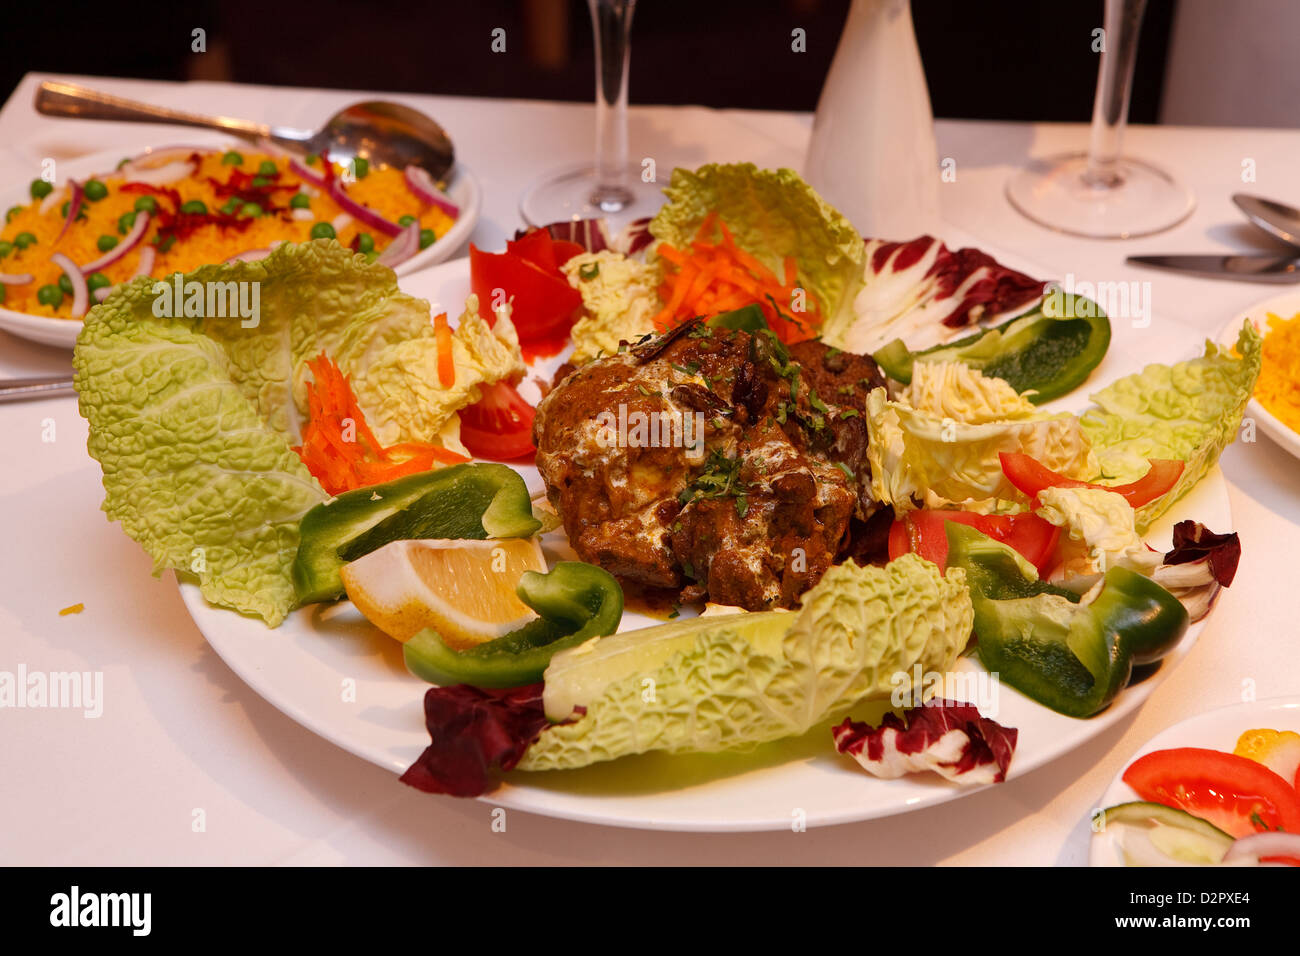 Colourful Indian food on a table in a restaurant Stock Photo